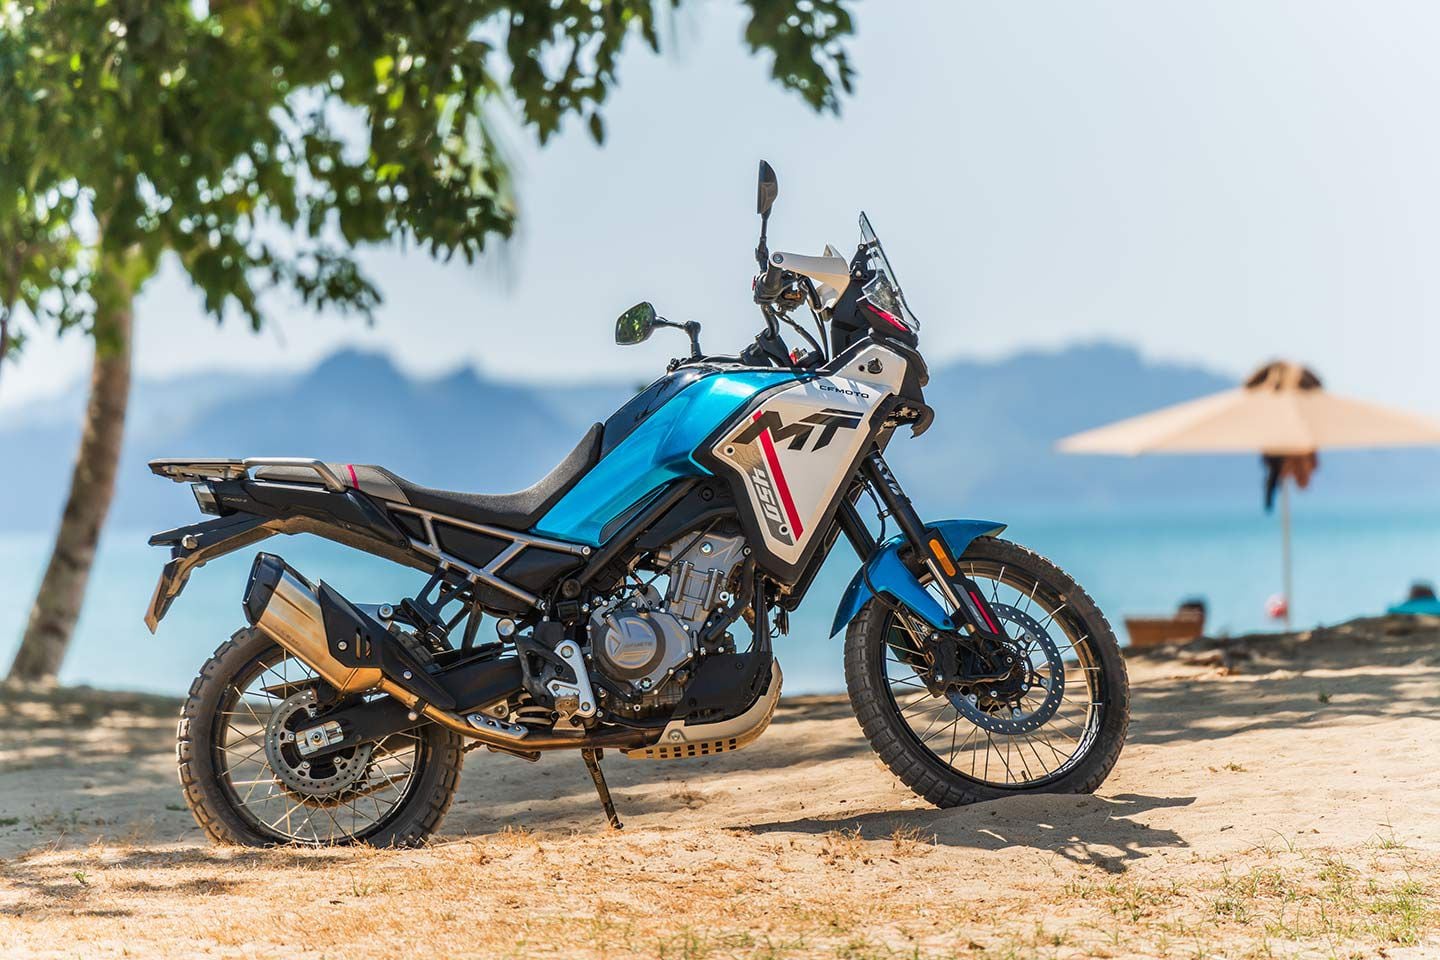 Ibex 450 in Zephyr Blue. Dimensions are more similar to a full-size adventure bike than a small, entry-level one, giving the bike a grown-up look.